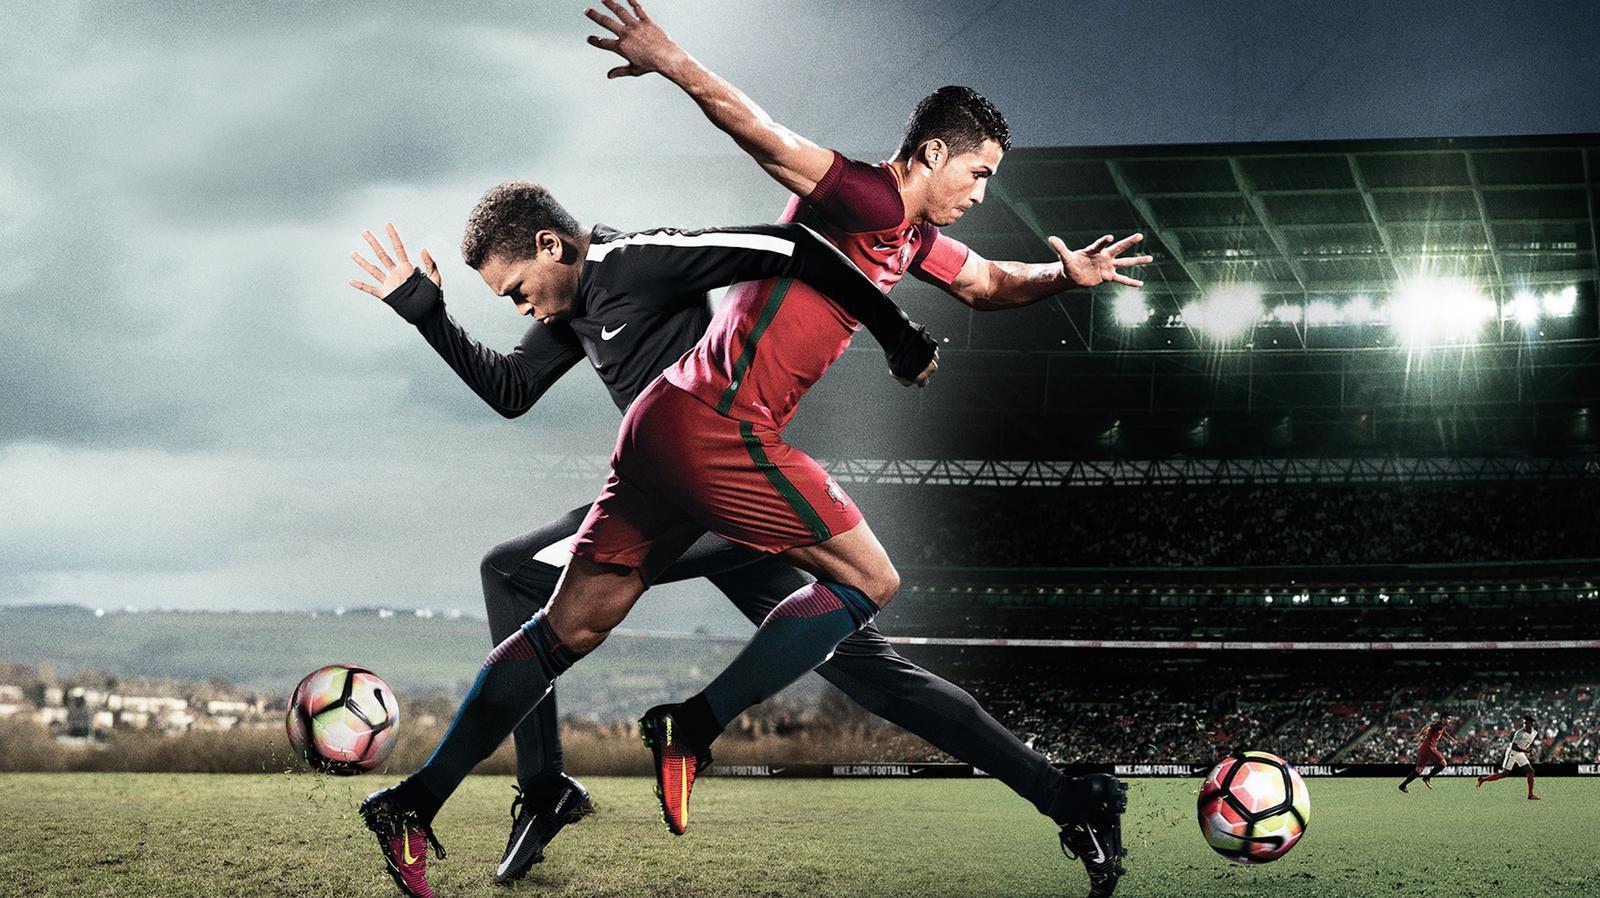 Nike News Football presents "The Switch, " featuring